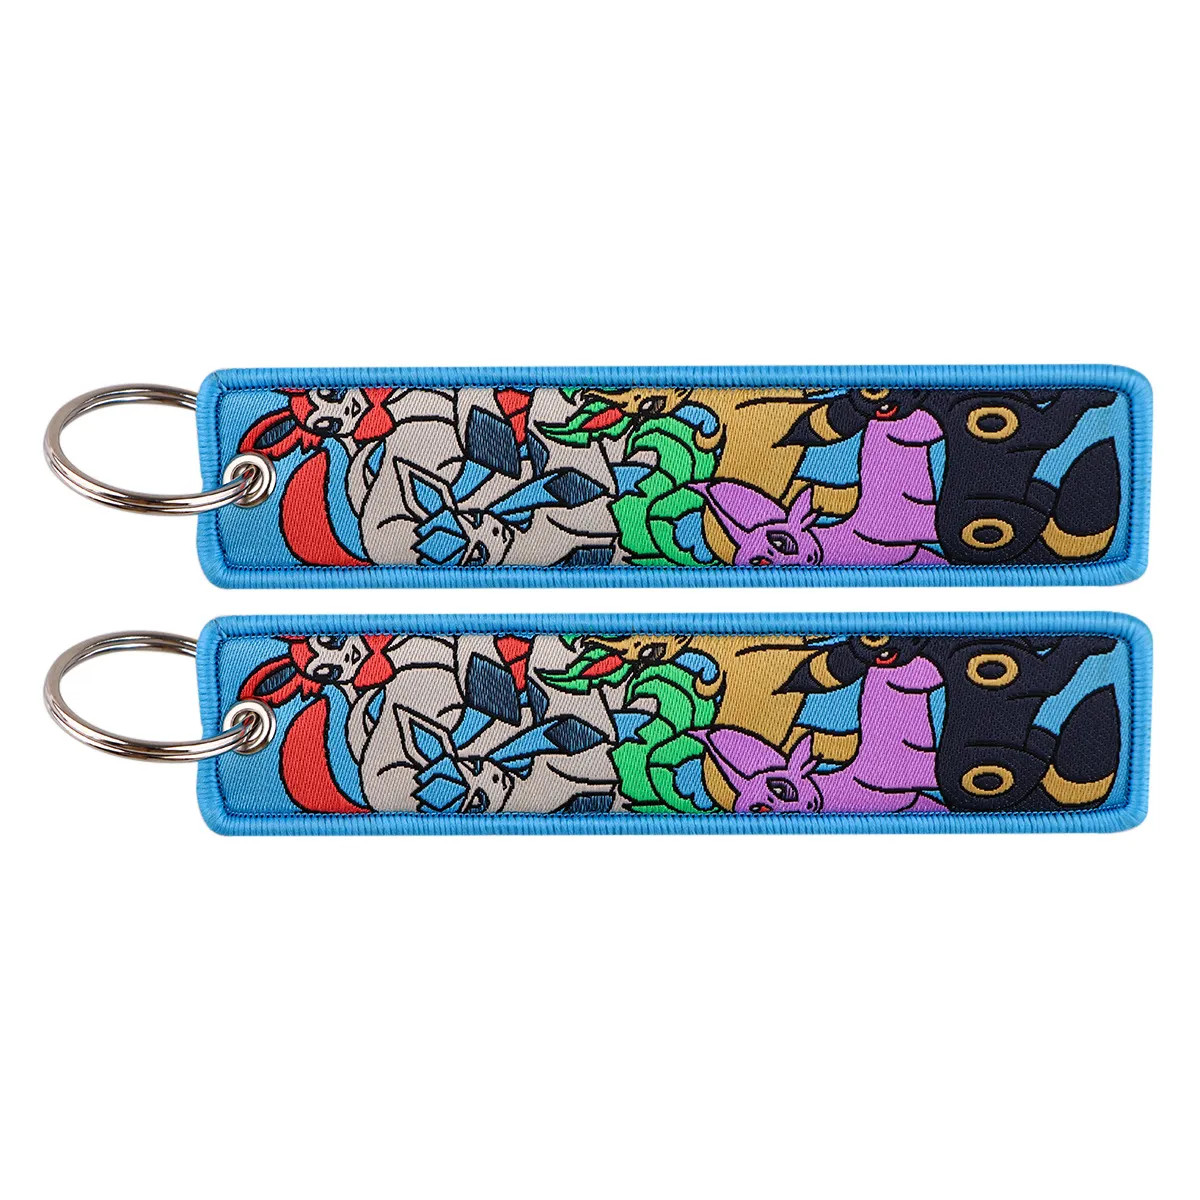 Keychains & Lanyards Various Types Of Cartoon Cool Key Tag Embroidery Fobs For Motorcycles Cars Bag Backpack Keychain Fashion Ring Gi Otejf